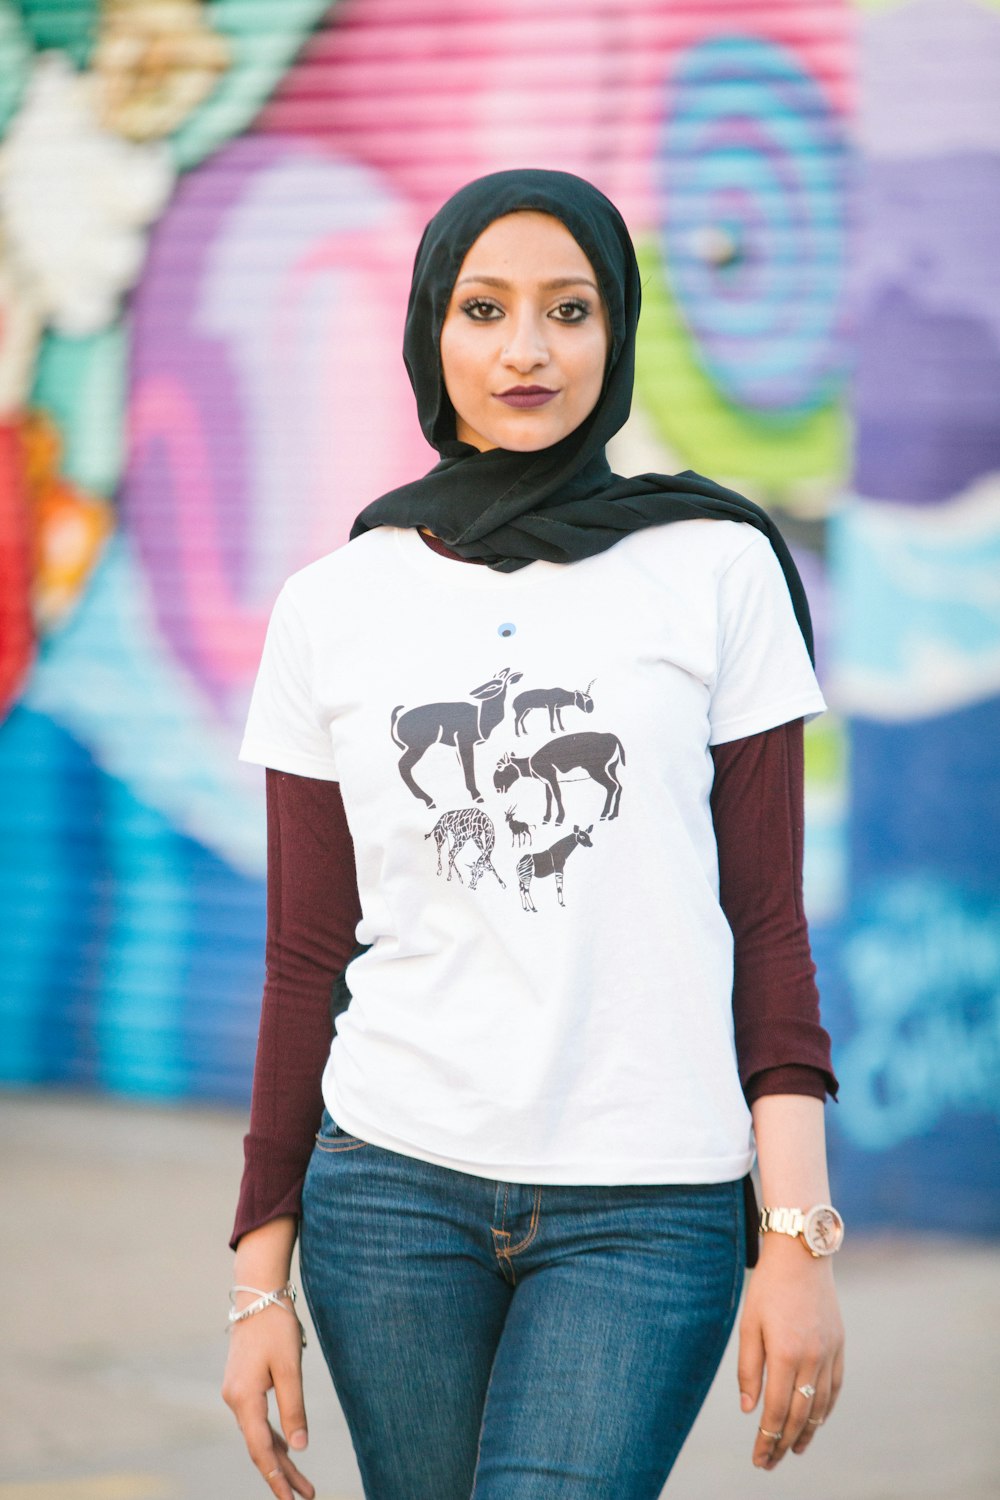 Woman in white and black crew neck t-shirt photo – Free Brooklyn Image on  Unsplash